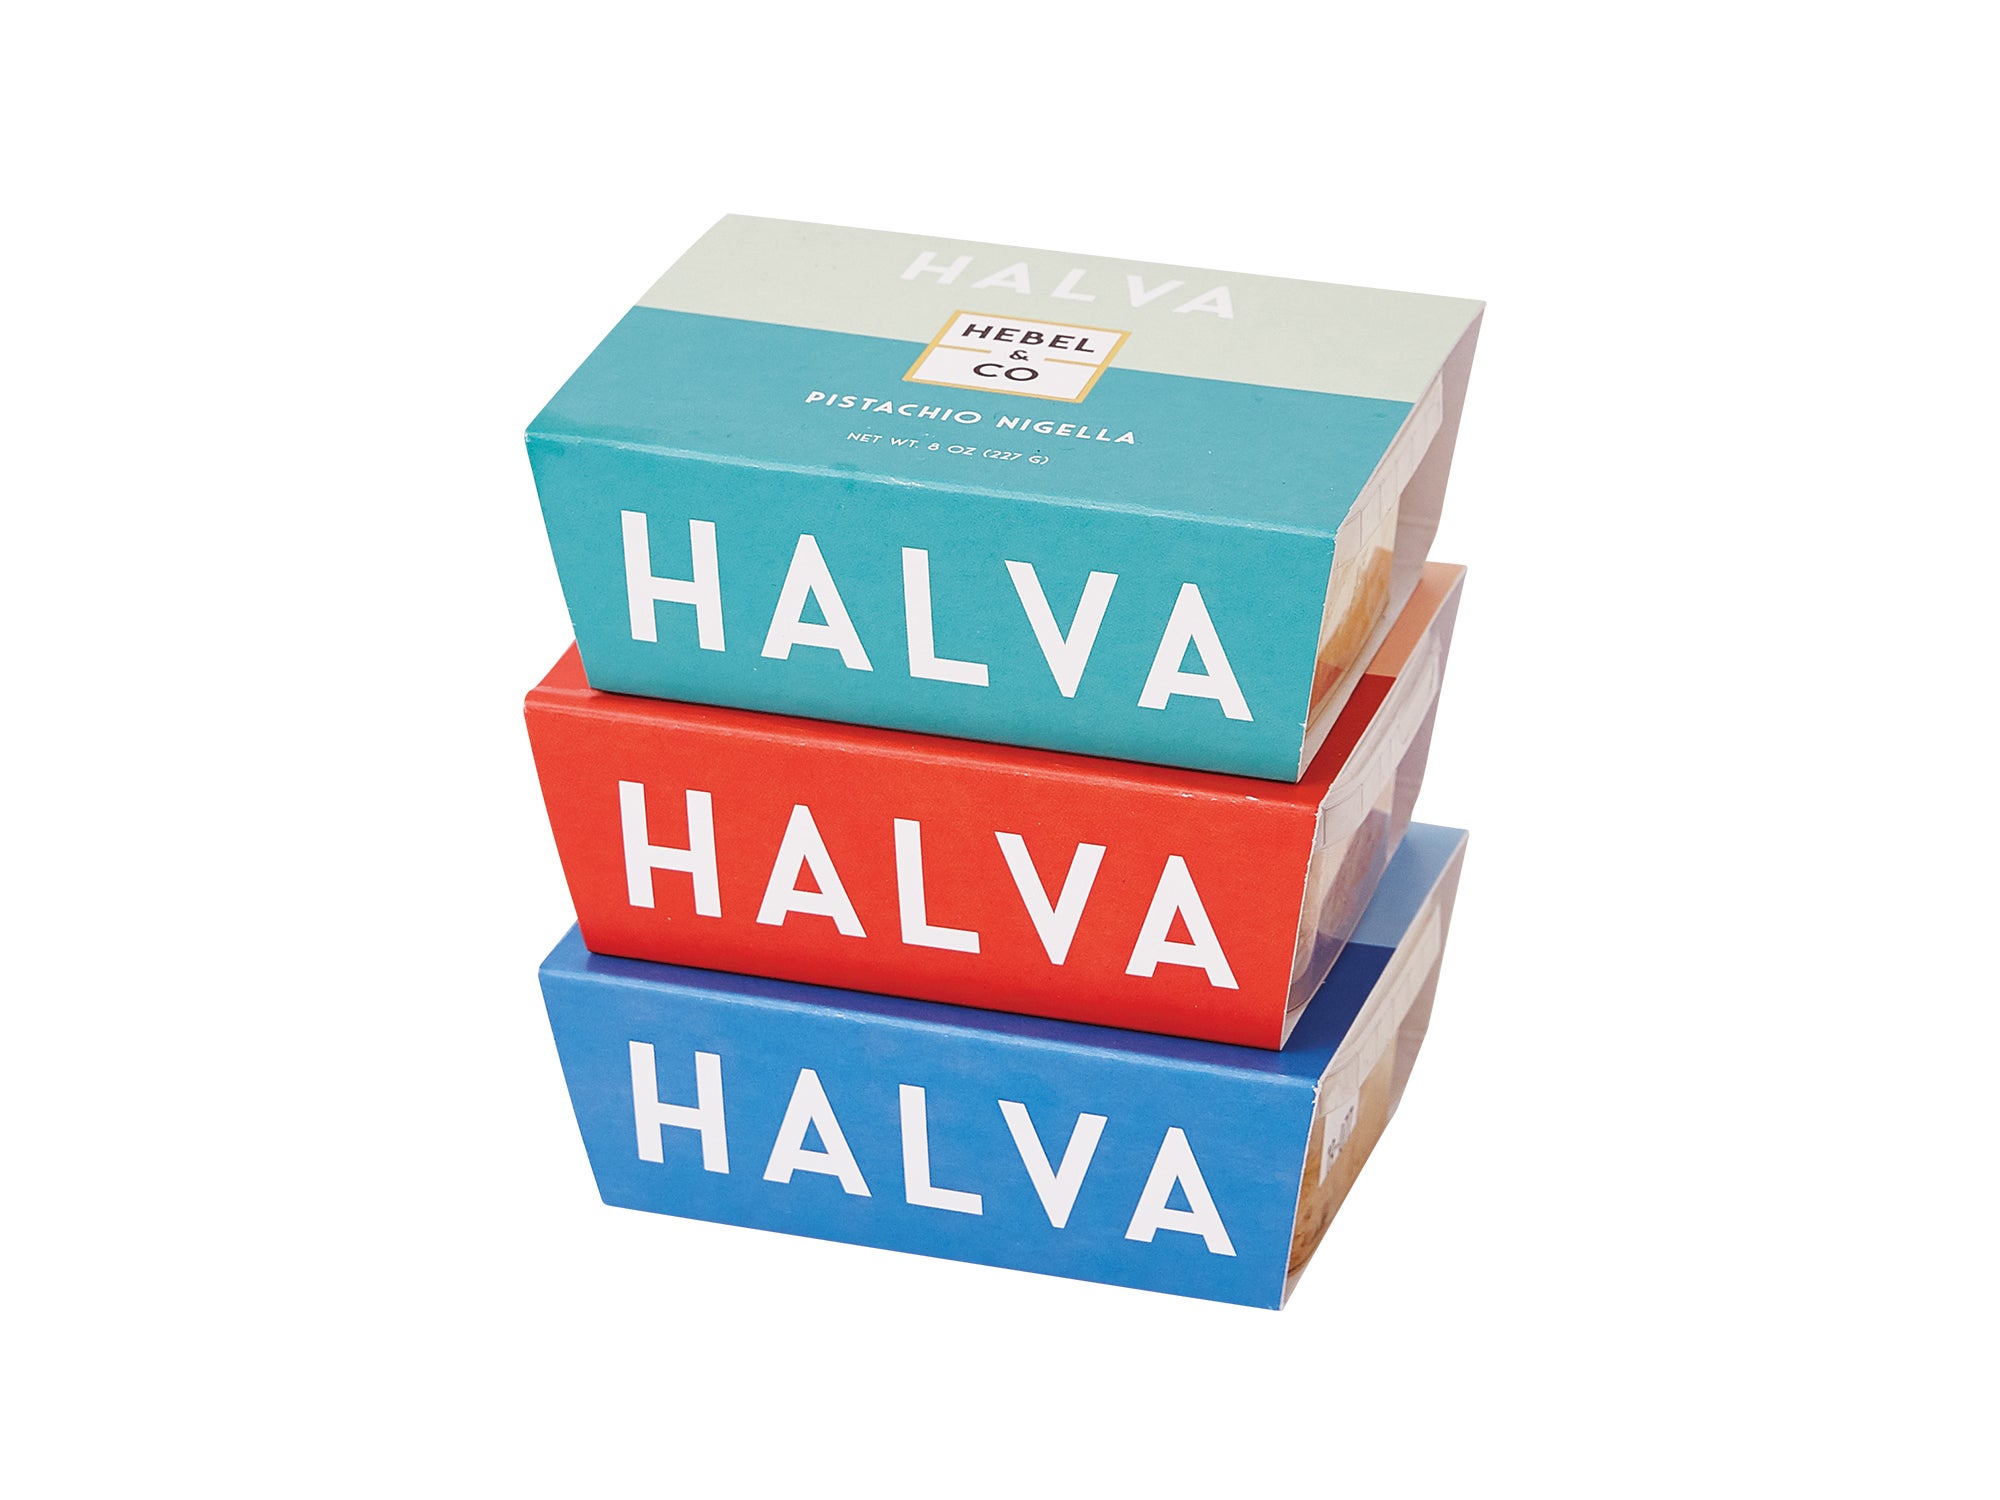 Your Birthright Packing Guide Includes the Cutest Halva Youâve Ever Seen